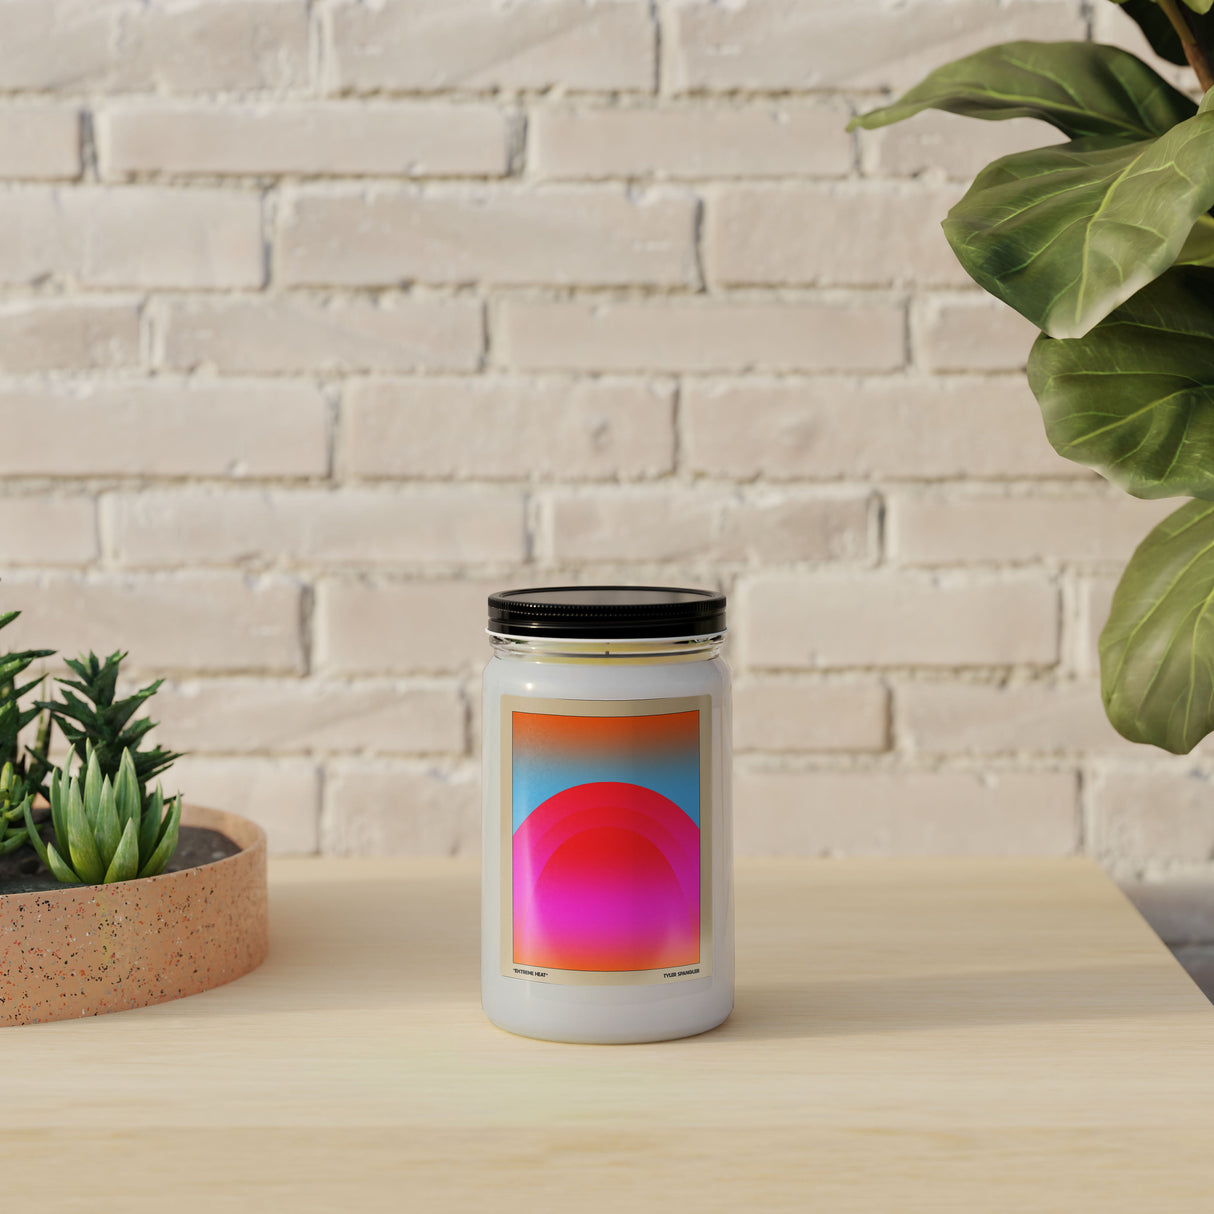 Tyler Spangler Scented Candle I Extreme Heat I Premium Scented Candle